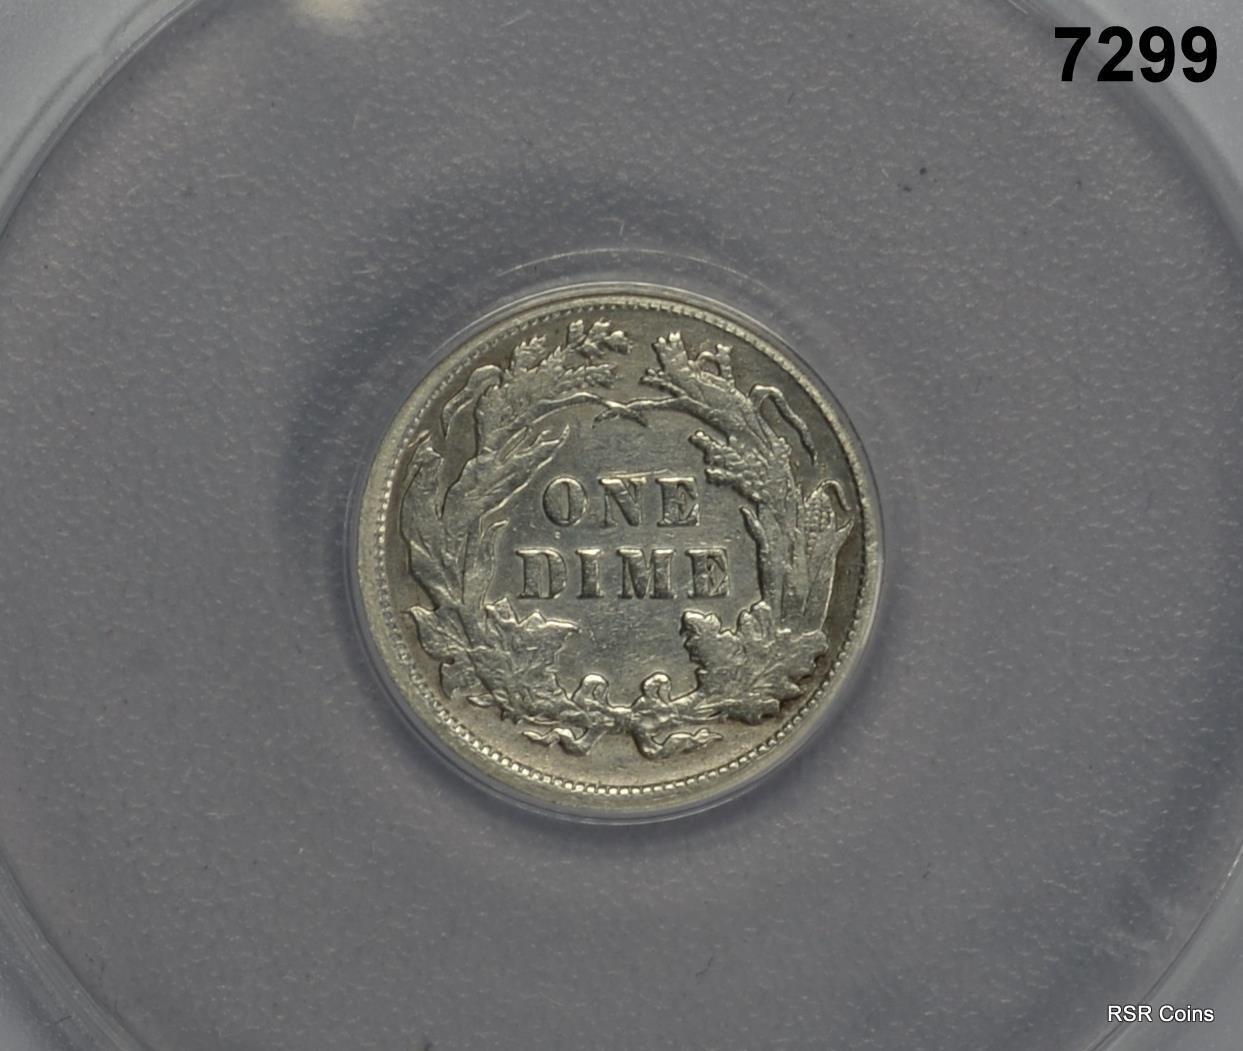 1891 SEATED DIME ANACS CERTIFIED AU50 CLEANED #7299